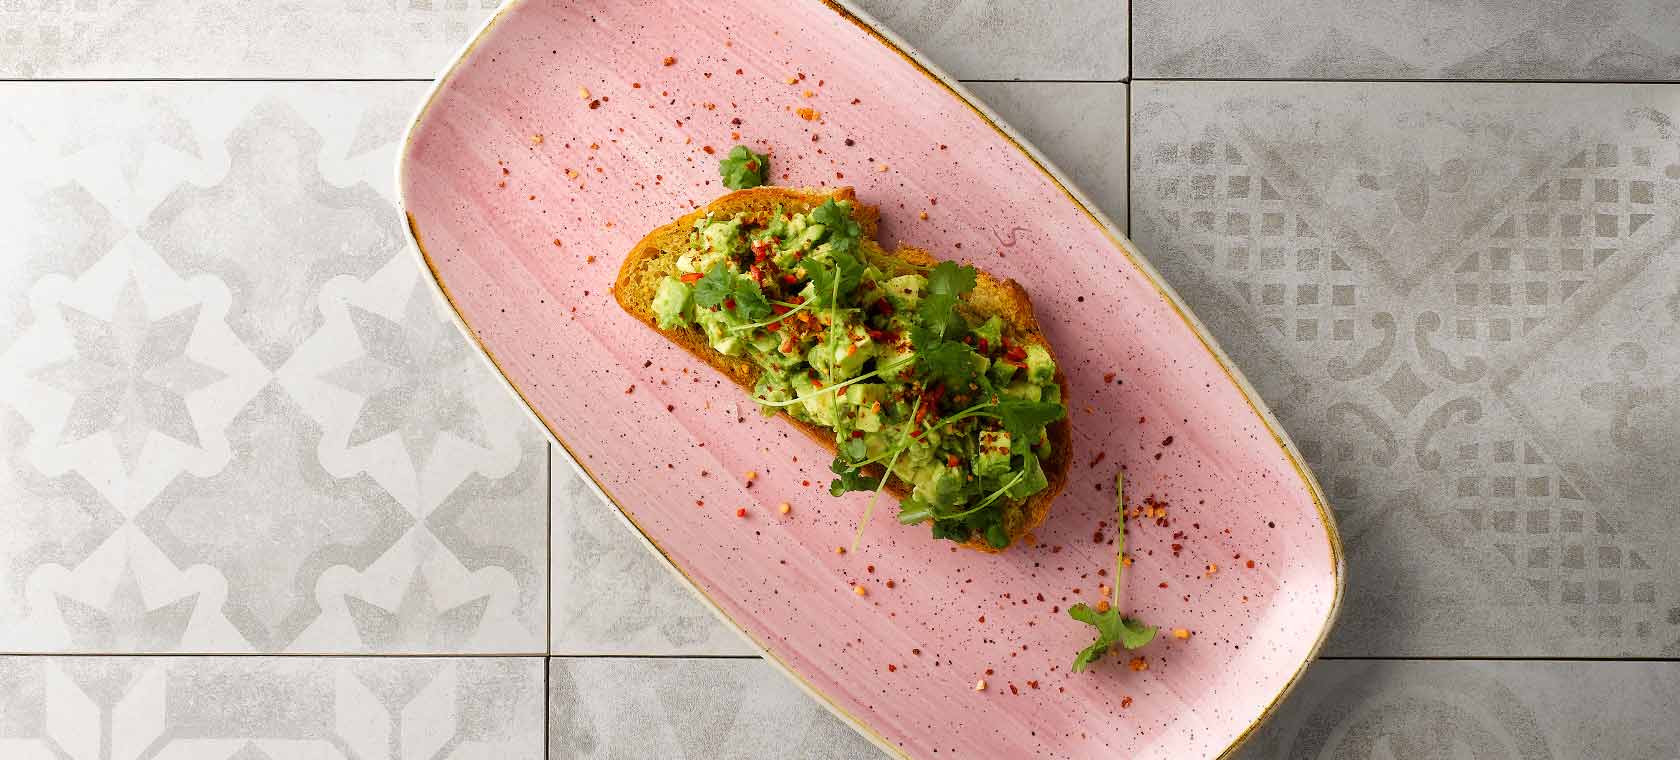 Long flat pink dish holding avocado toast a garnished with parsley.